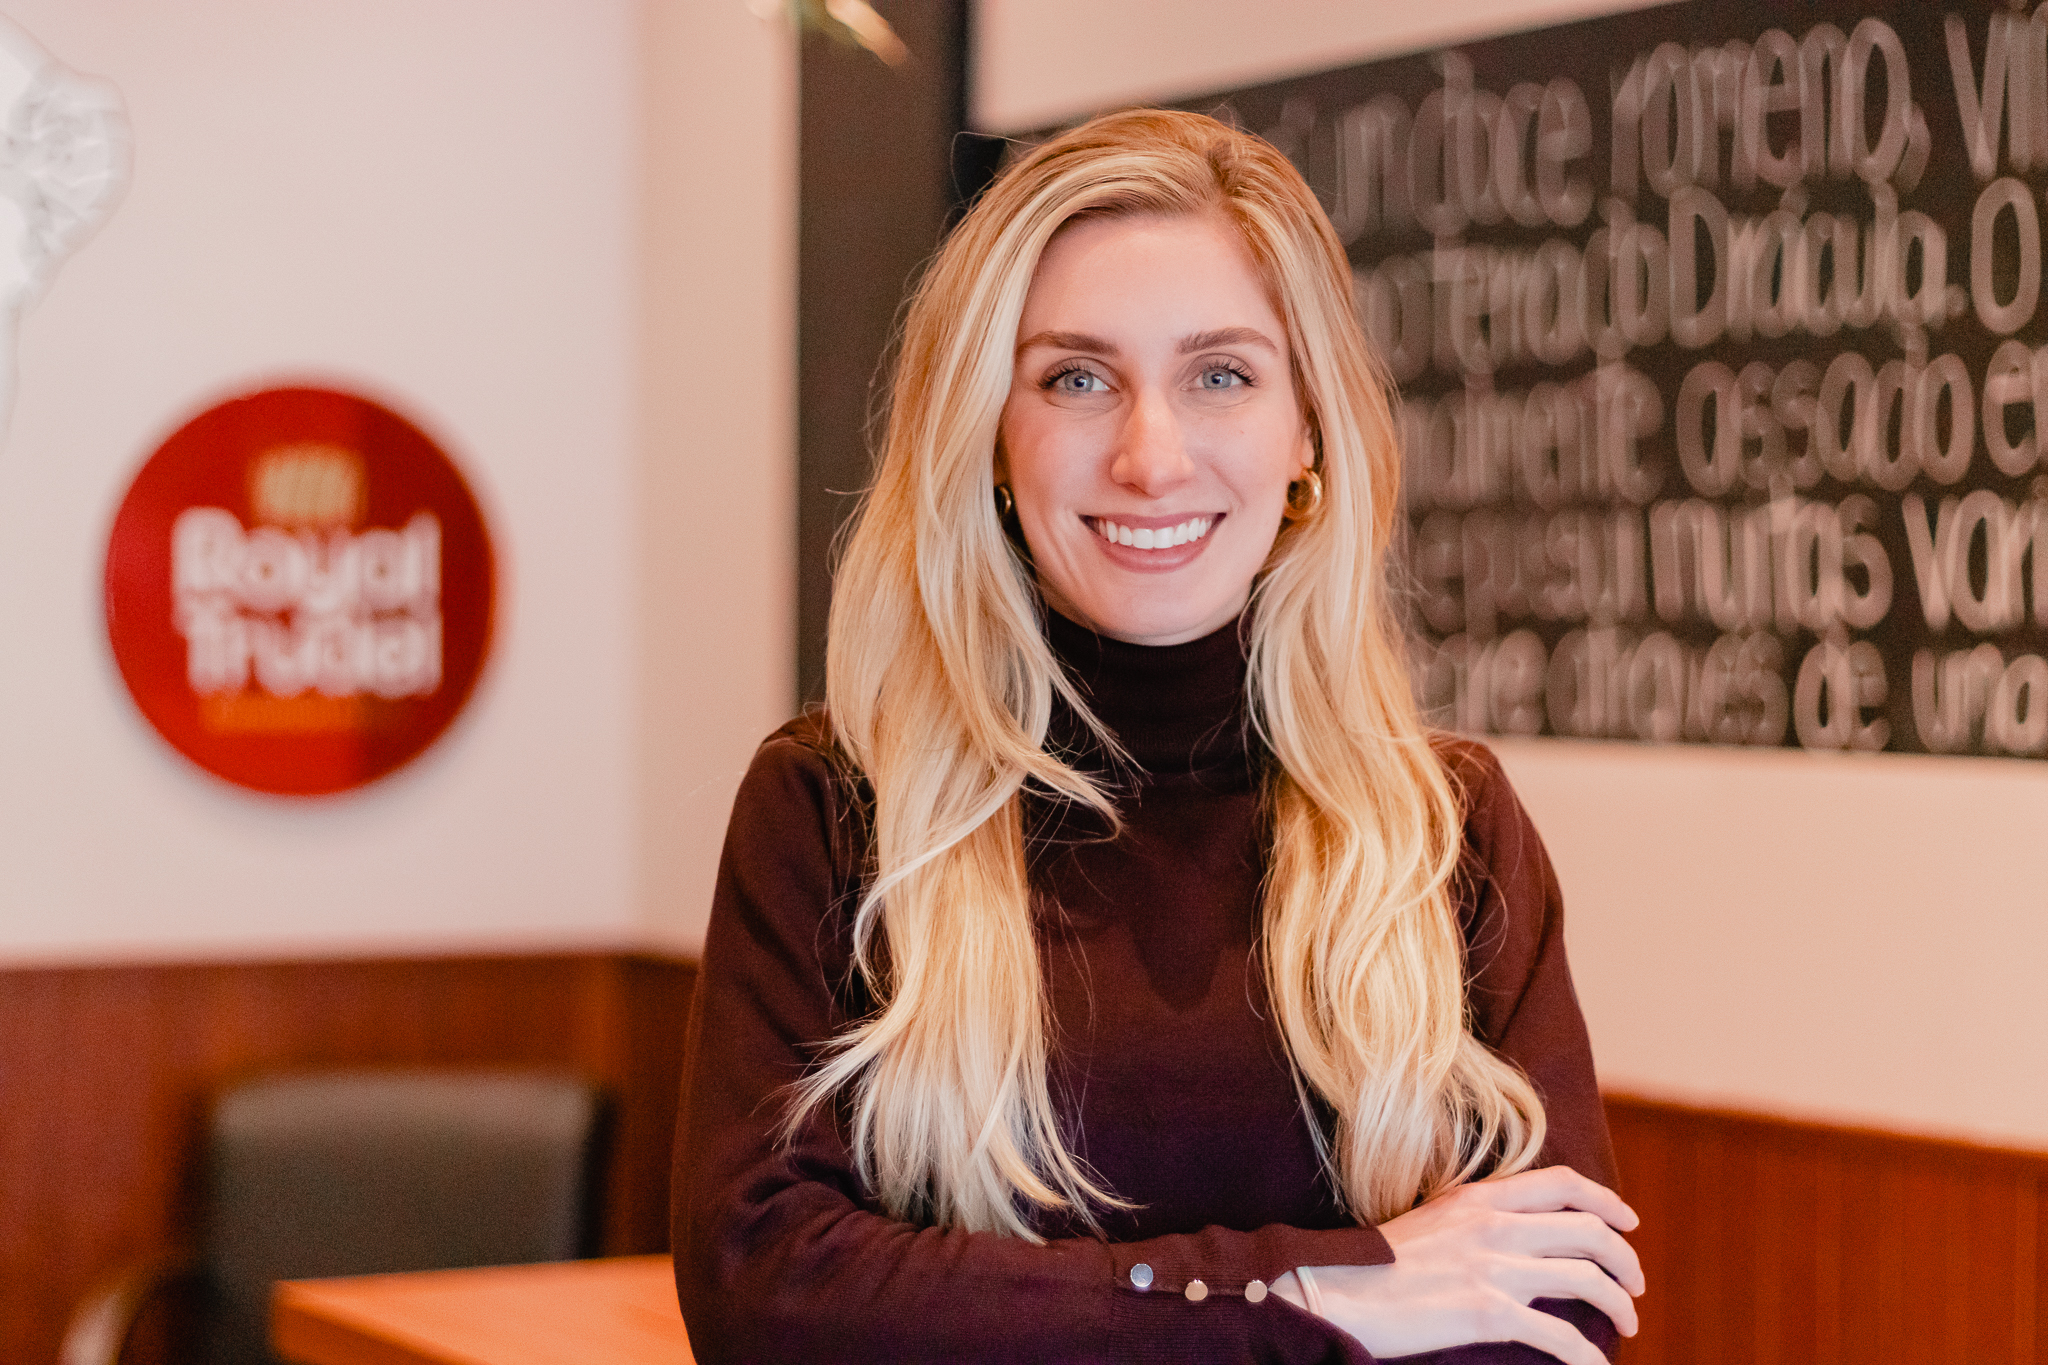 Business Administration alumna wins Forbes Under 30 award